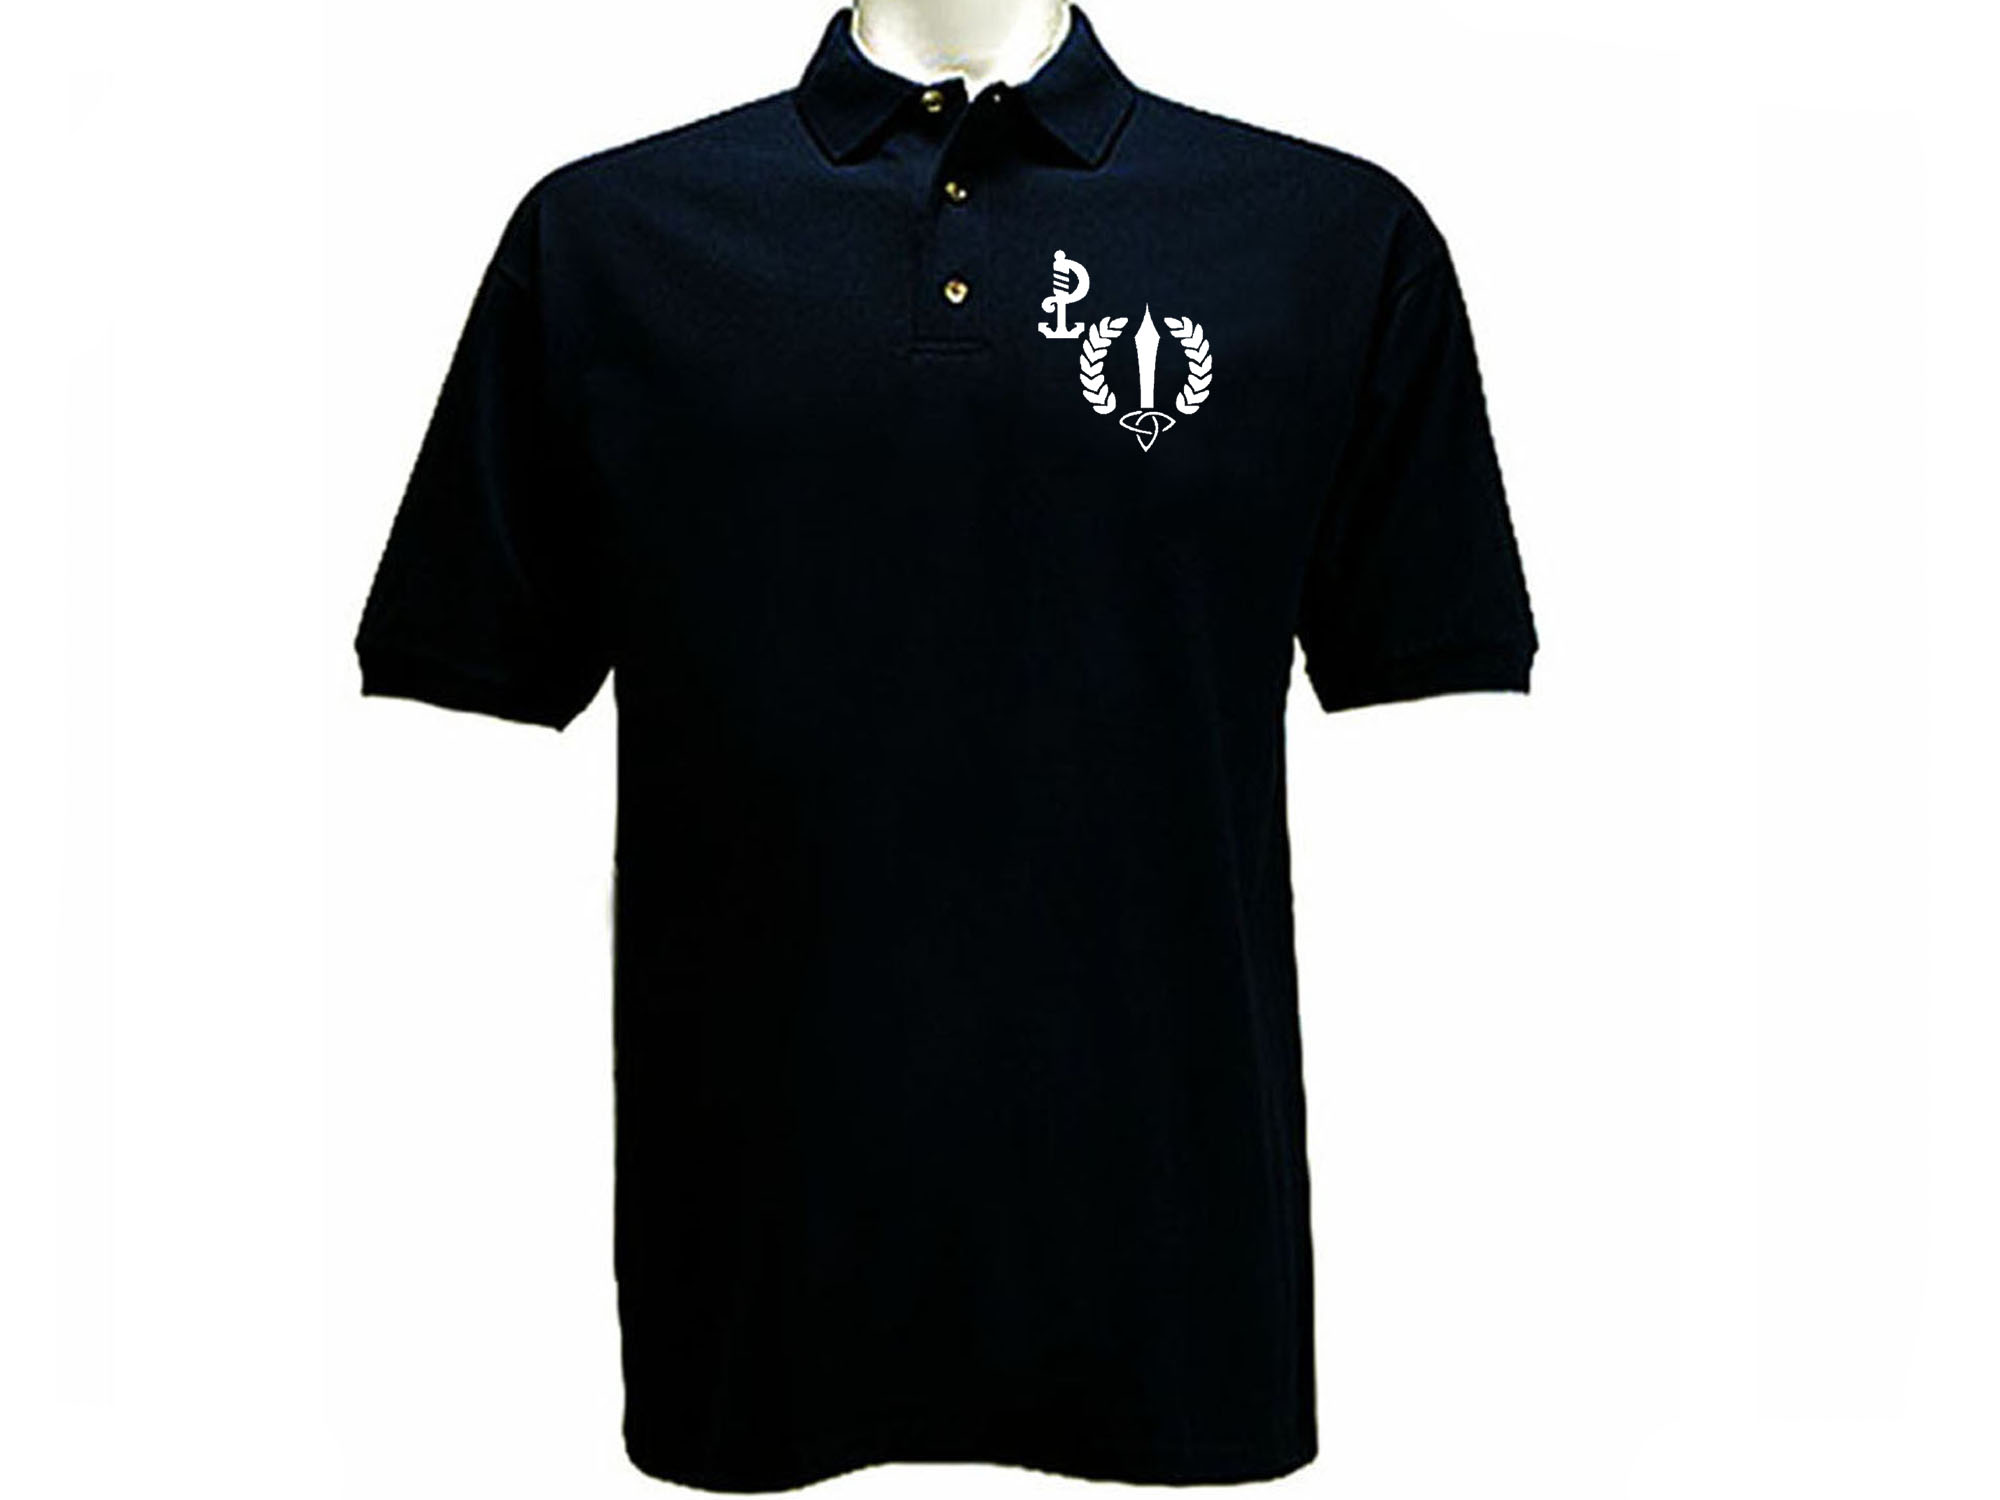 Army Ranger Wing ARW Irish Ops Special Forces polo style black t-shirt